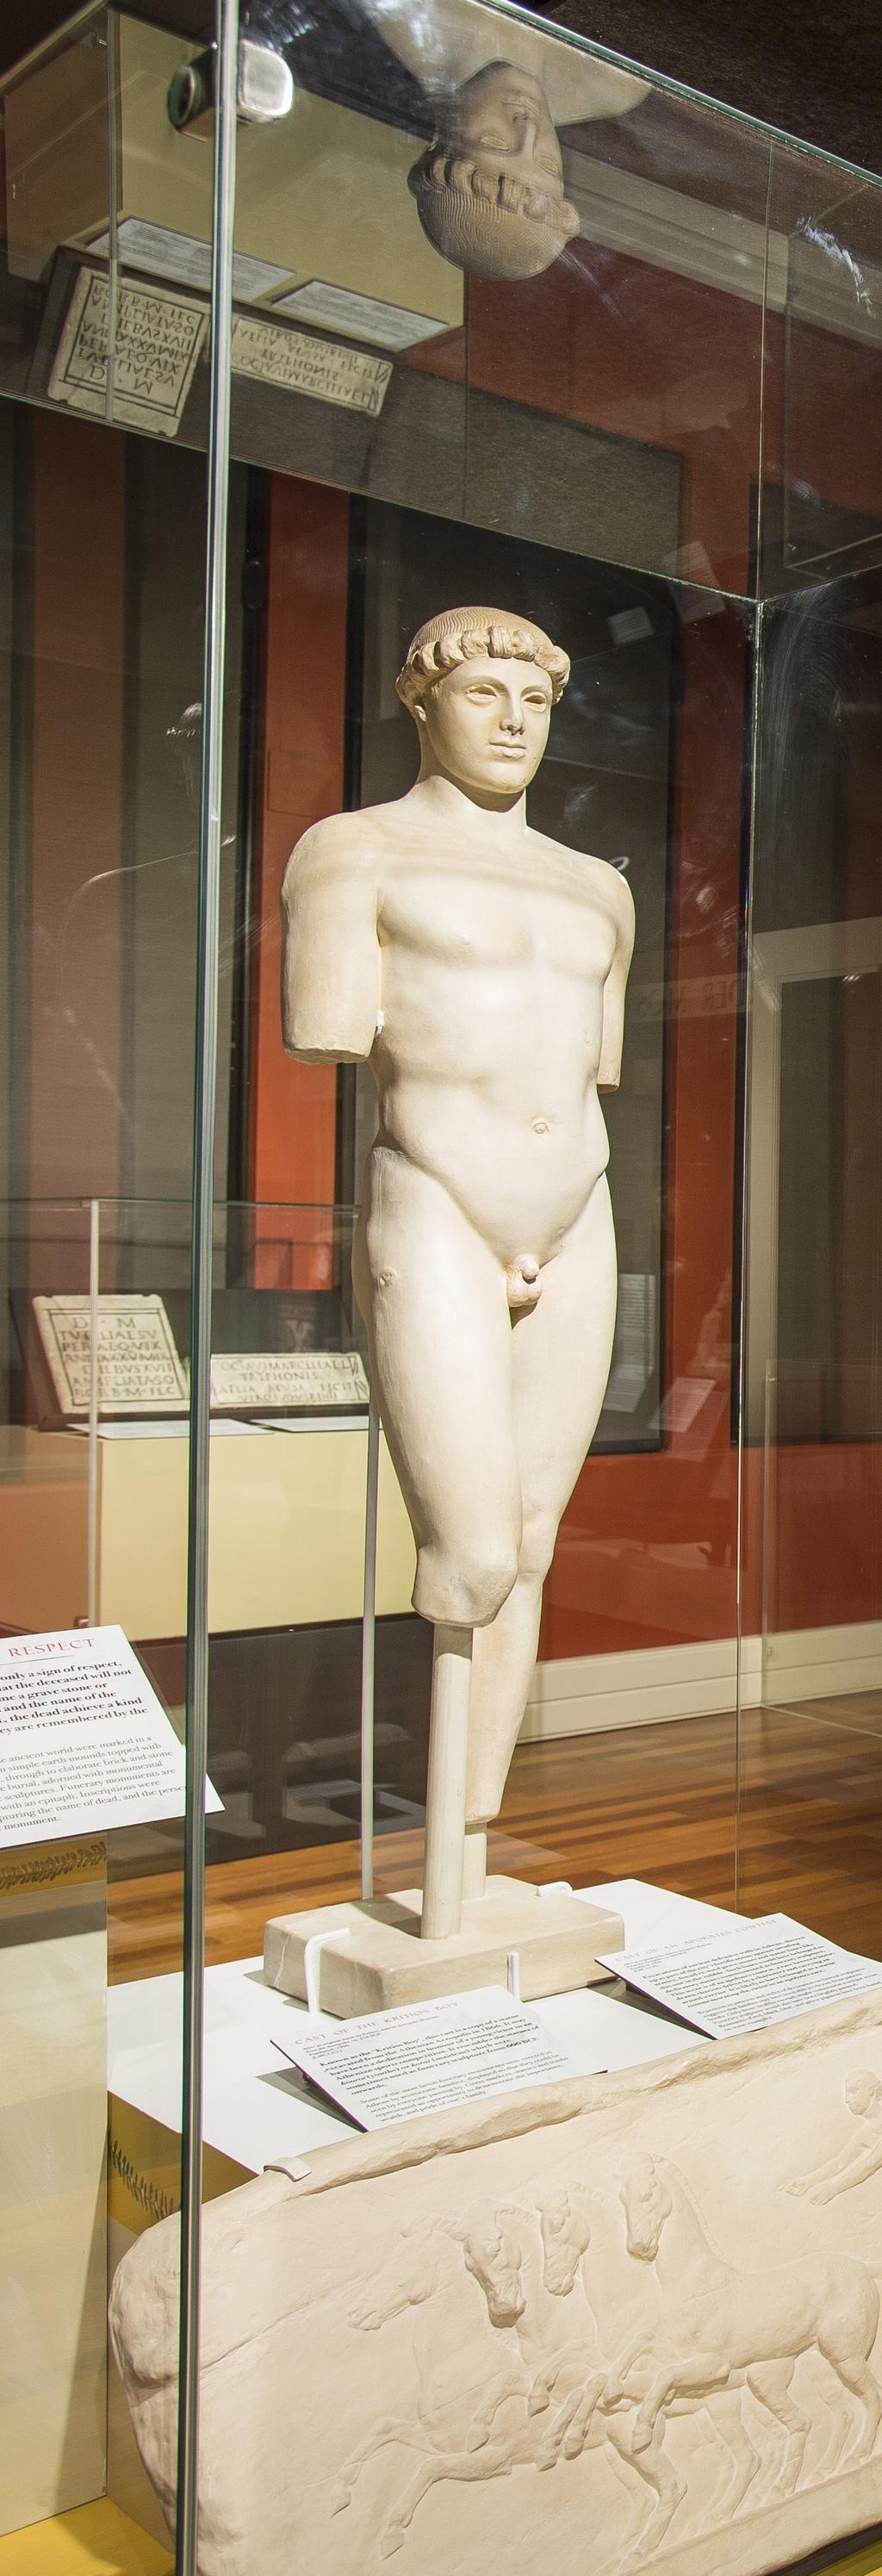 Who We Are One of the University of Canterbury s great treasures is the Teece Museum of Classical Antiquities which contains some of the finest classical antiquities in New Zealand.